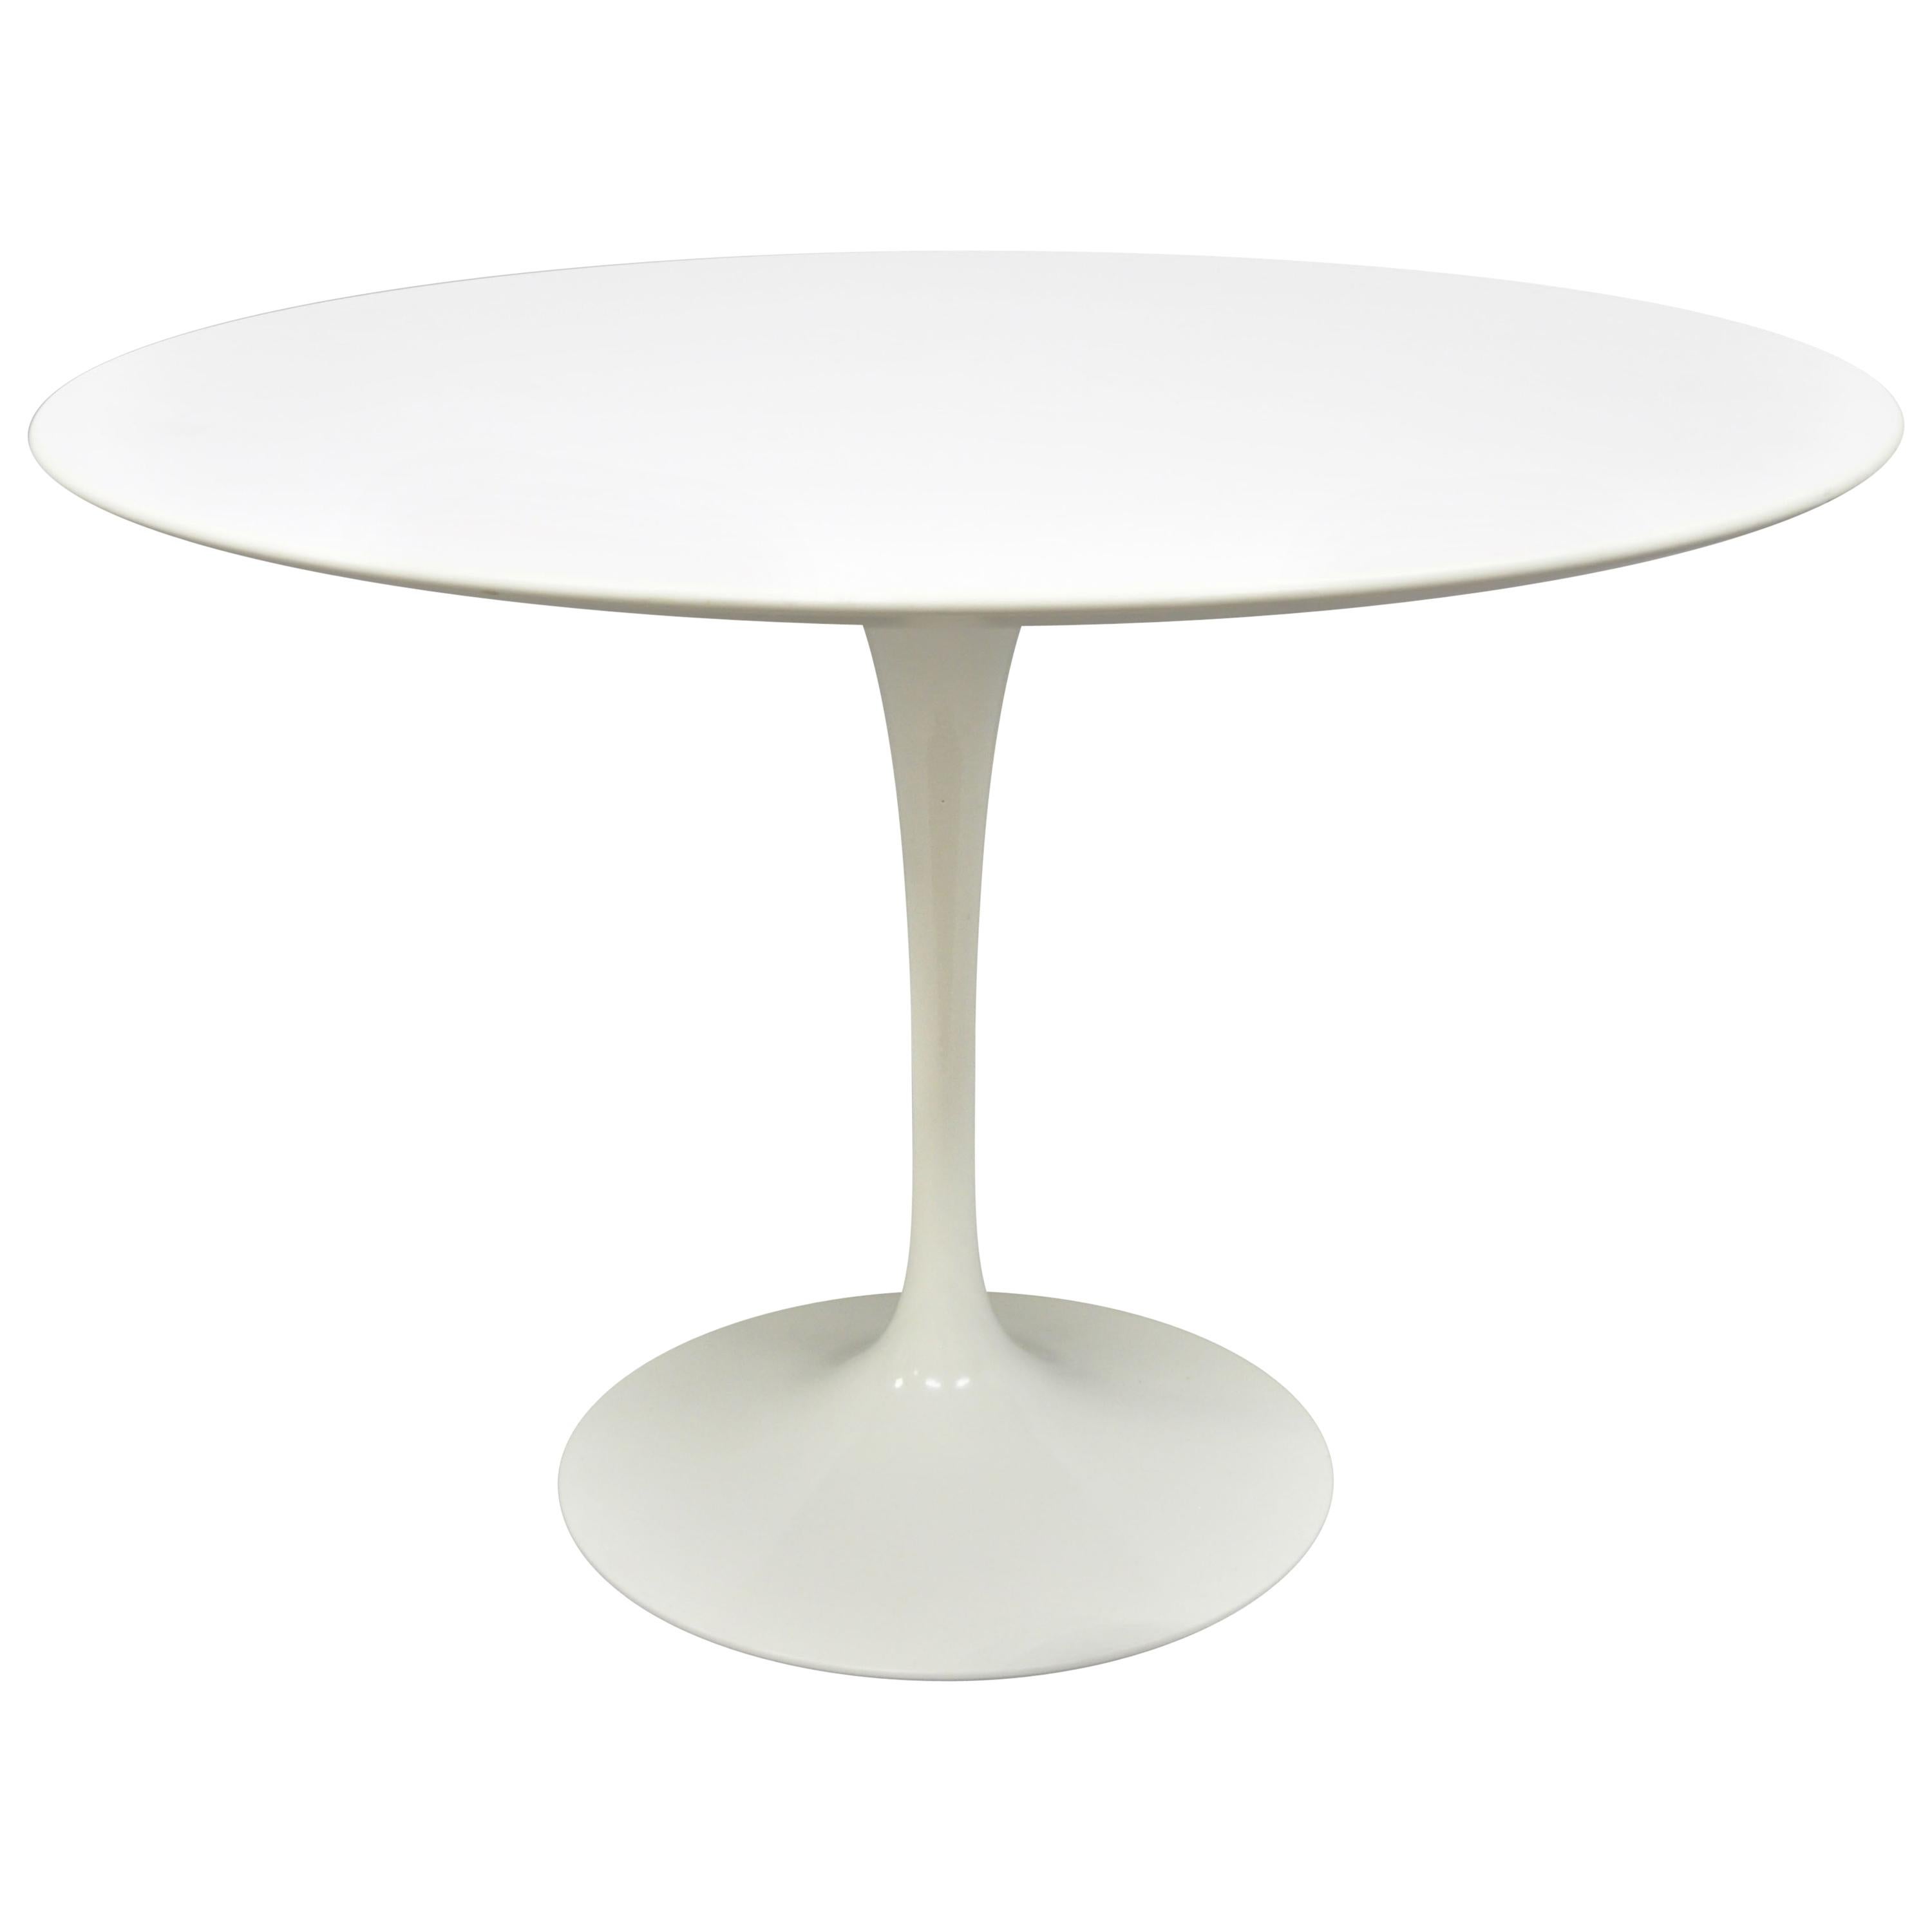 Knoll Eero Saarinen Round White Laminate Top Dining Table Made in Italy